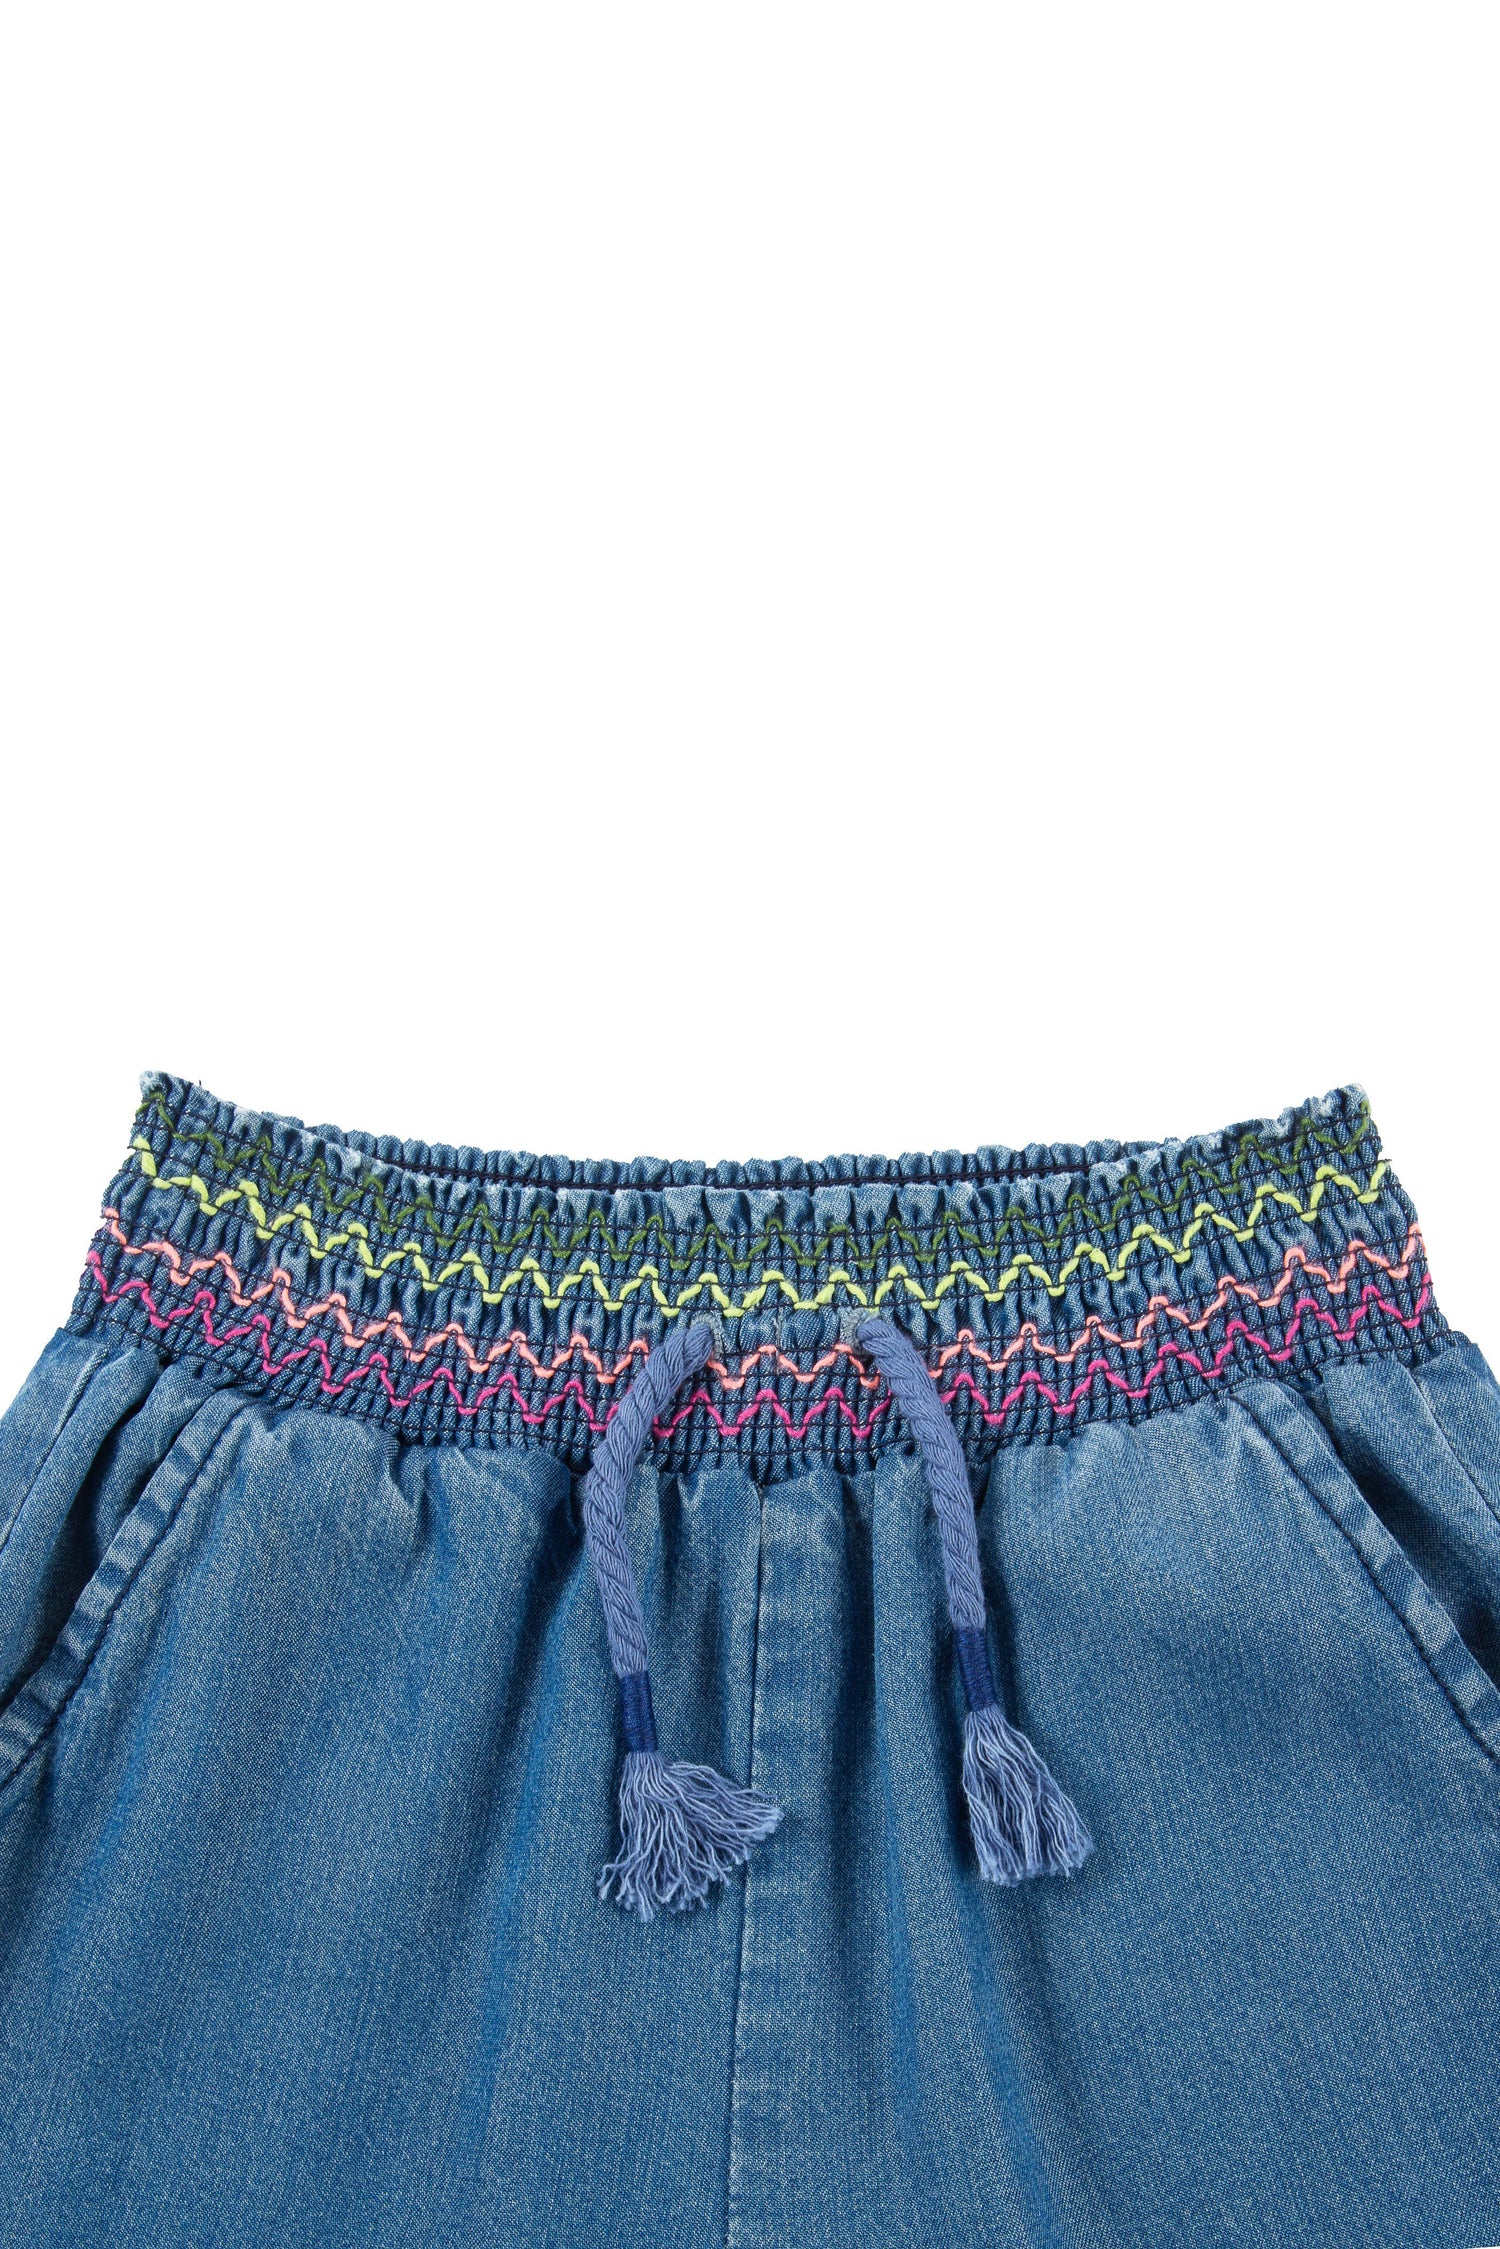 Close up of denim jogger with faux drawstring with fringe and multi-color, zig-zag stitching on elastic waist.